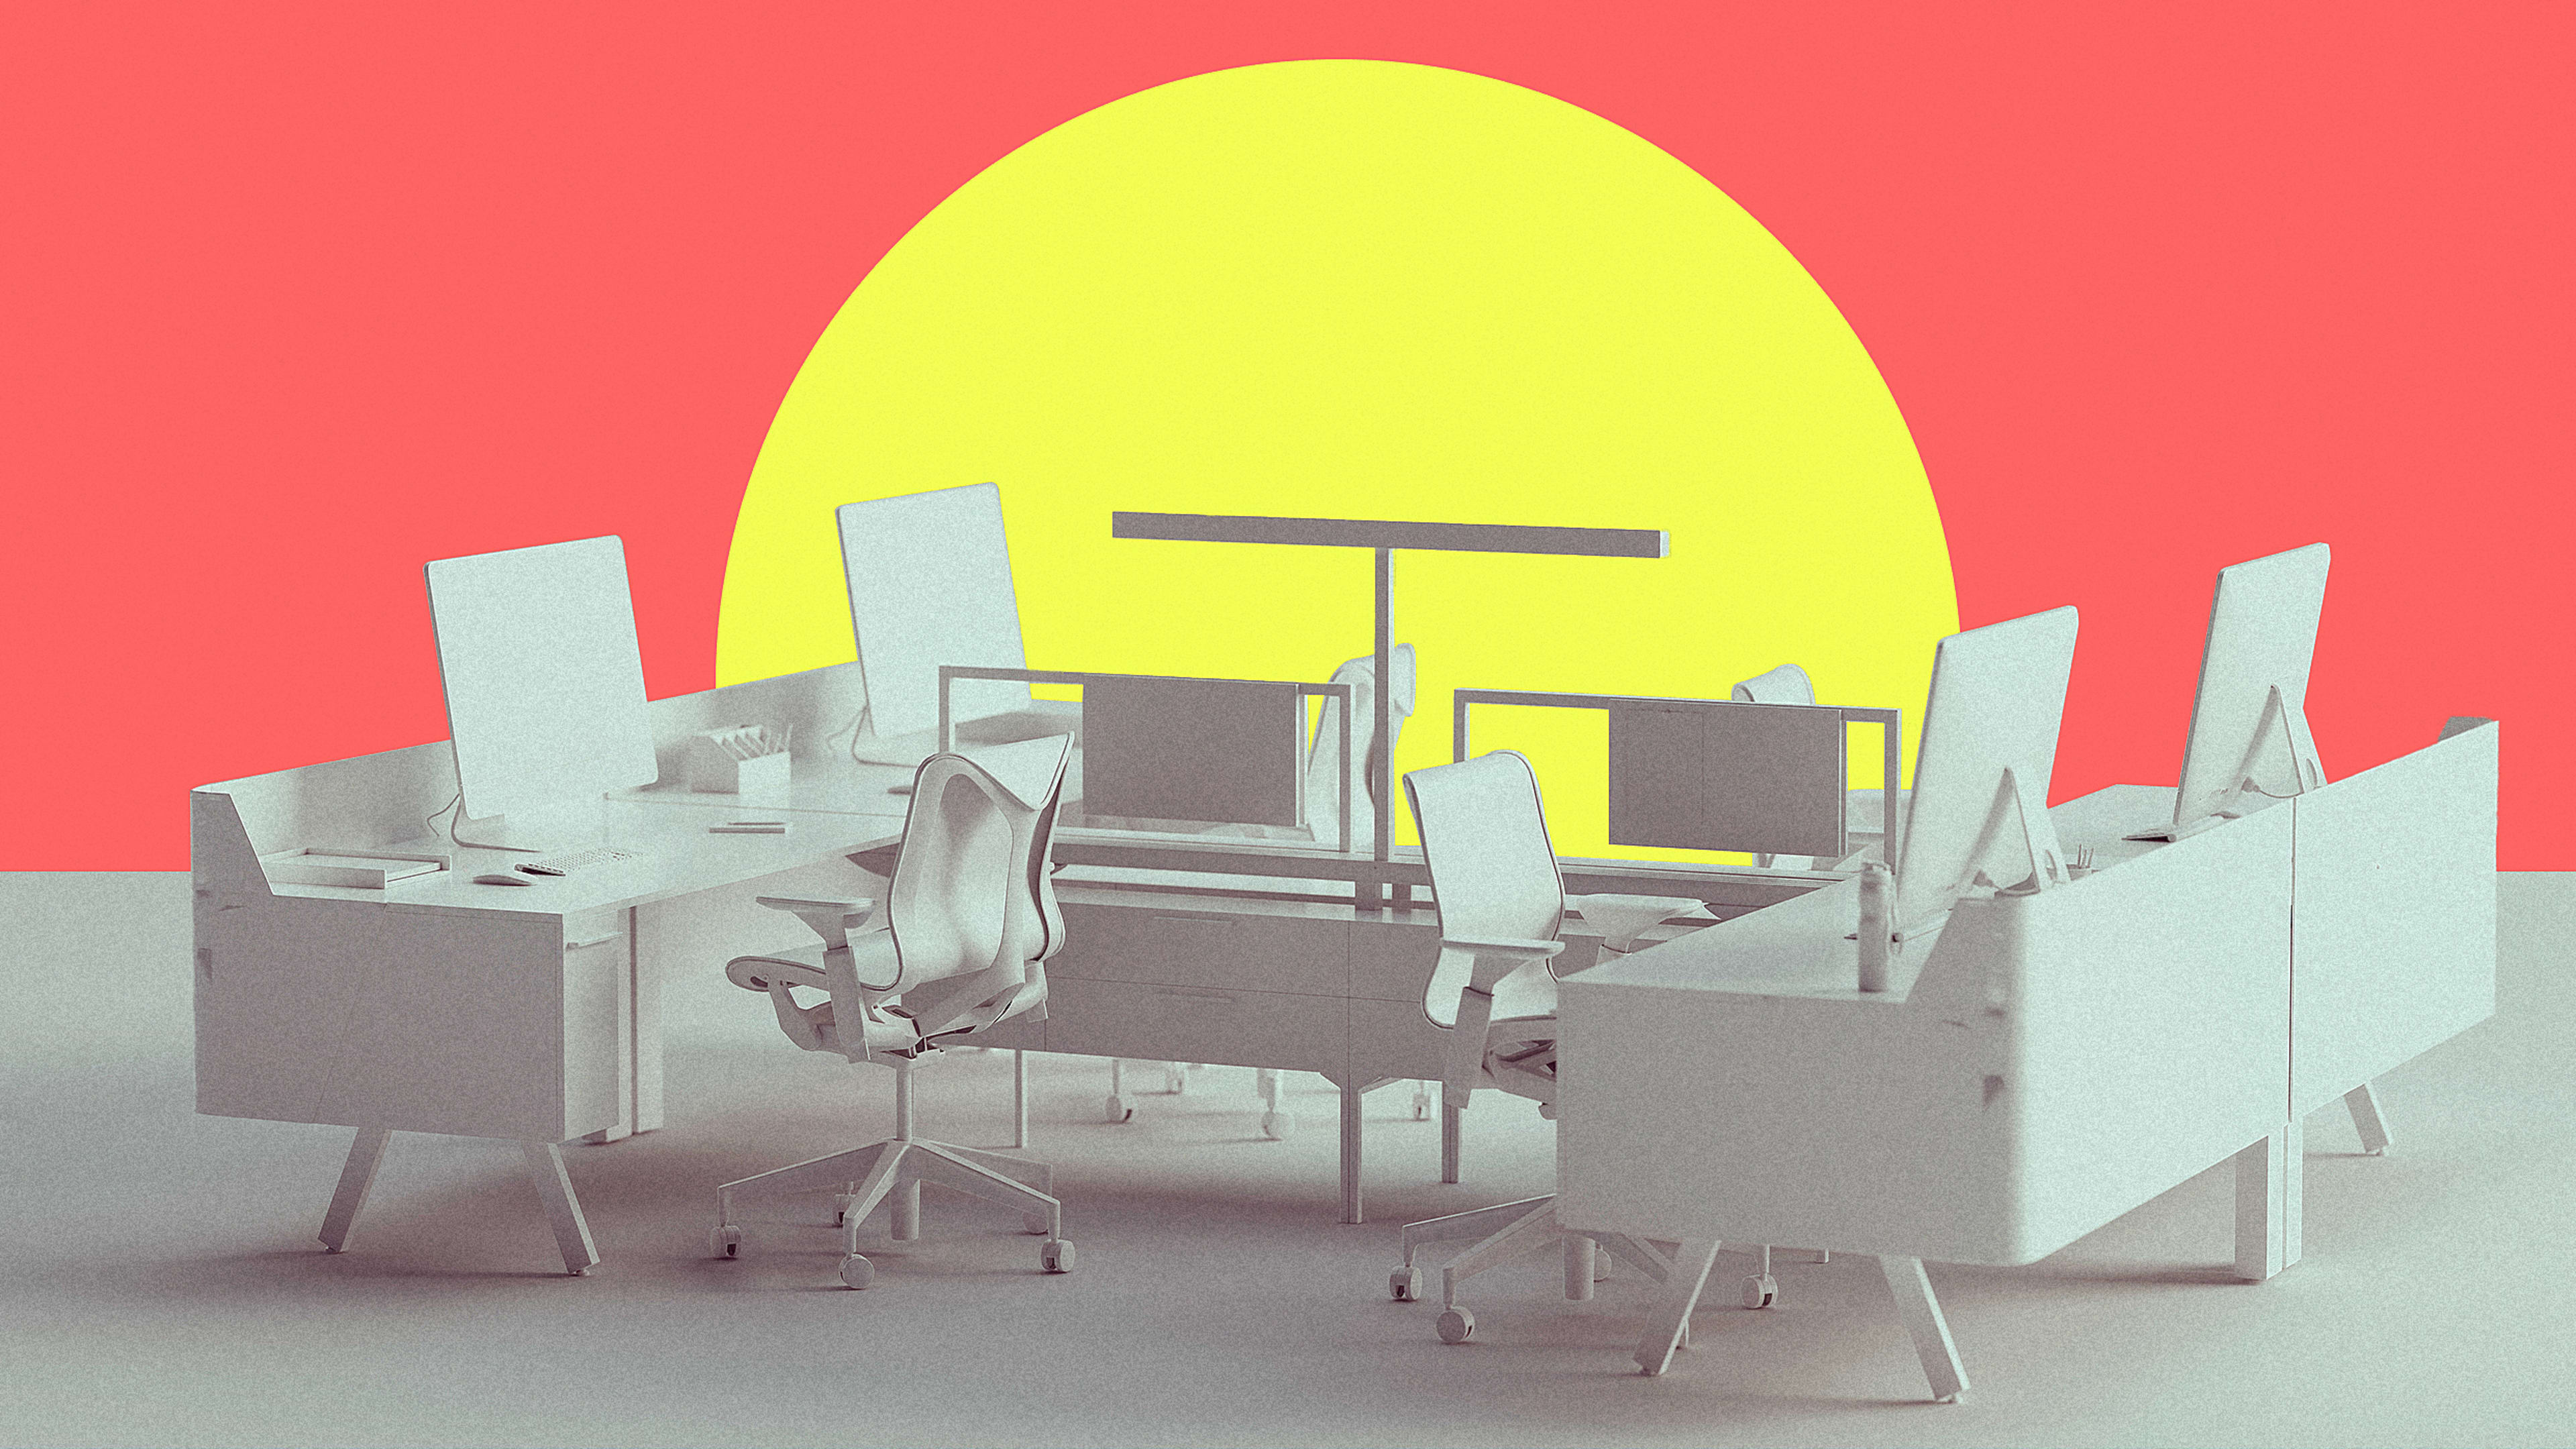 The top reason people want to come back to the office? To actually do some work